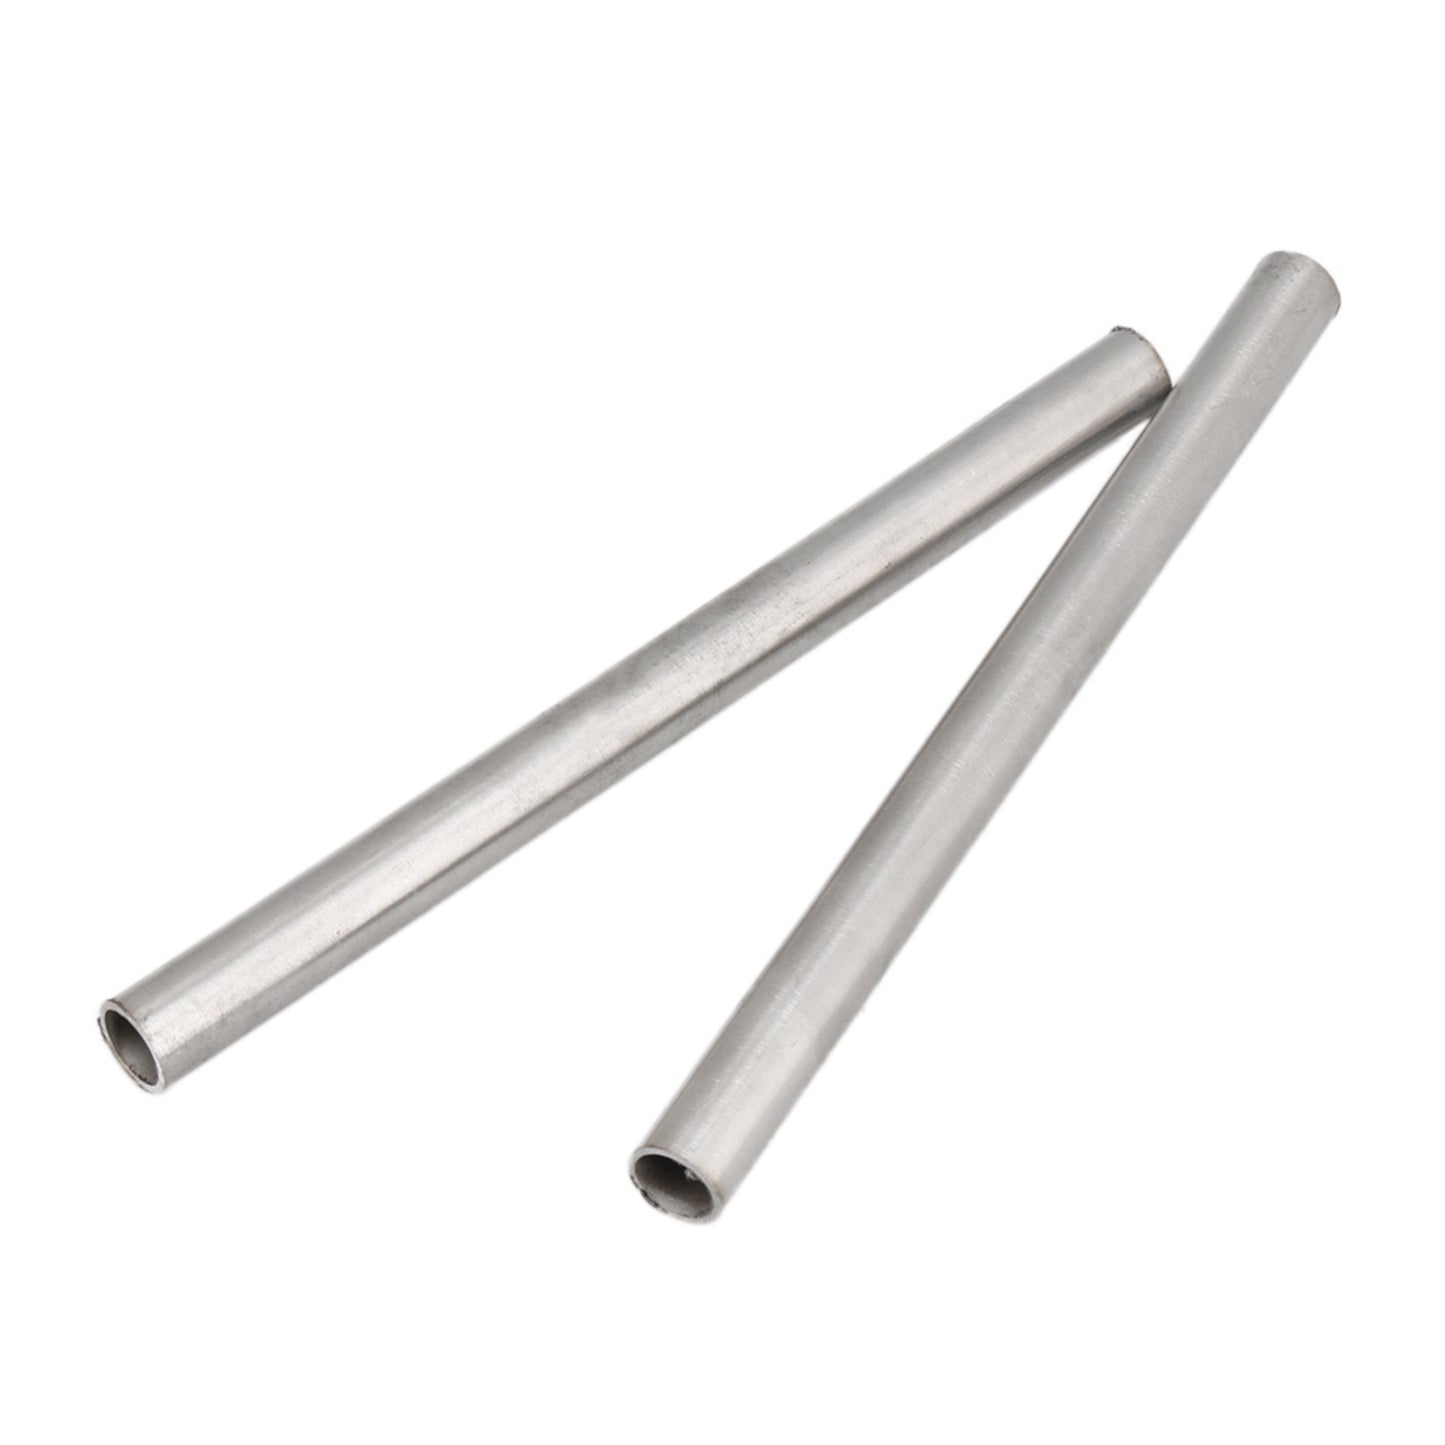 BQLZR 200x15mm 304 Stainless Steel Tubing ID 13mm Seamless Metal Round Tube Pack of 5